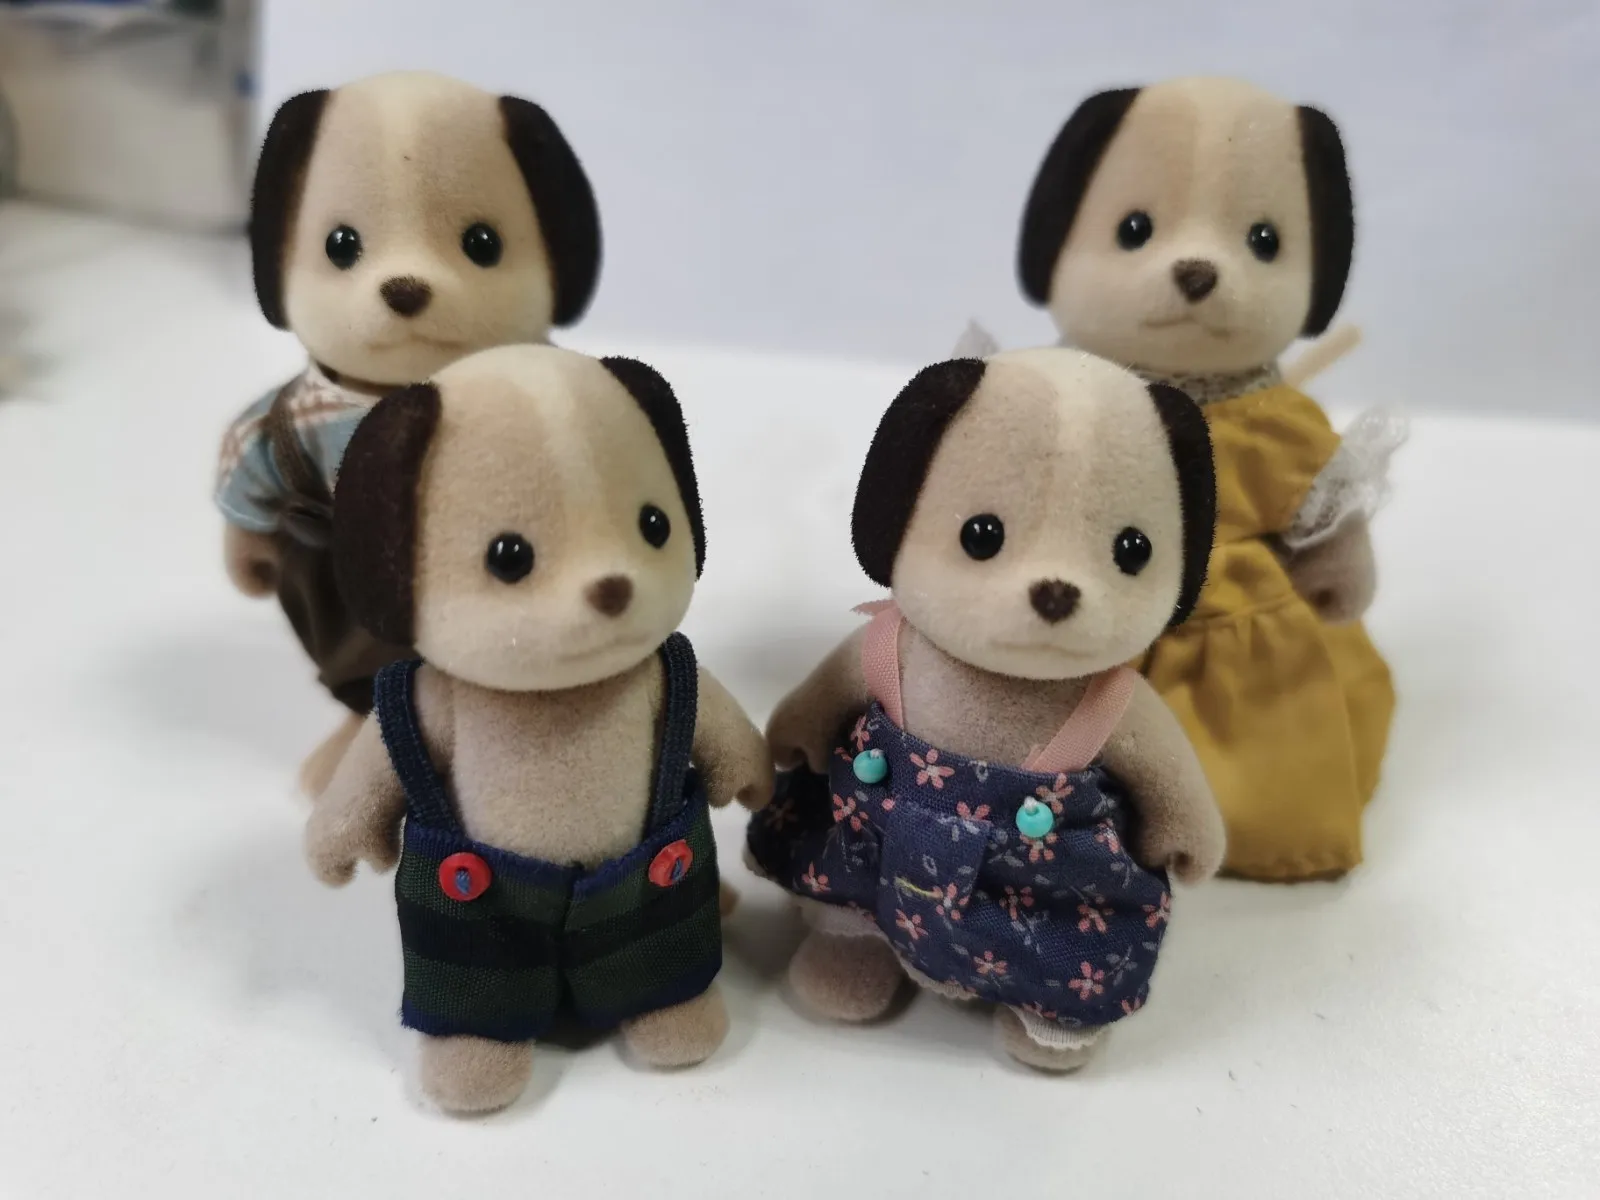 

Sylvanian Families Dollhouse Furry Animal Calico Critters Beagle Dog Family 4PCS Figures New with no Box